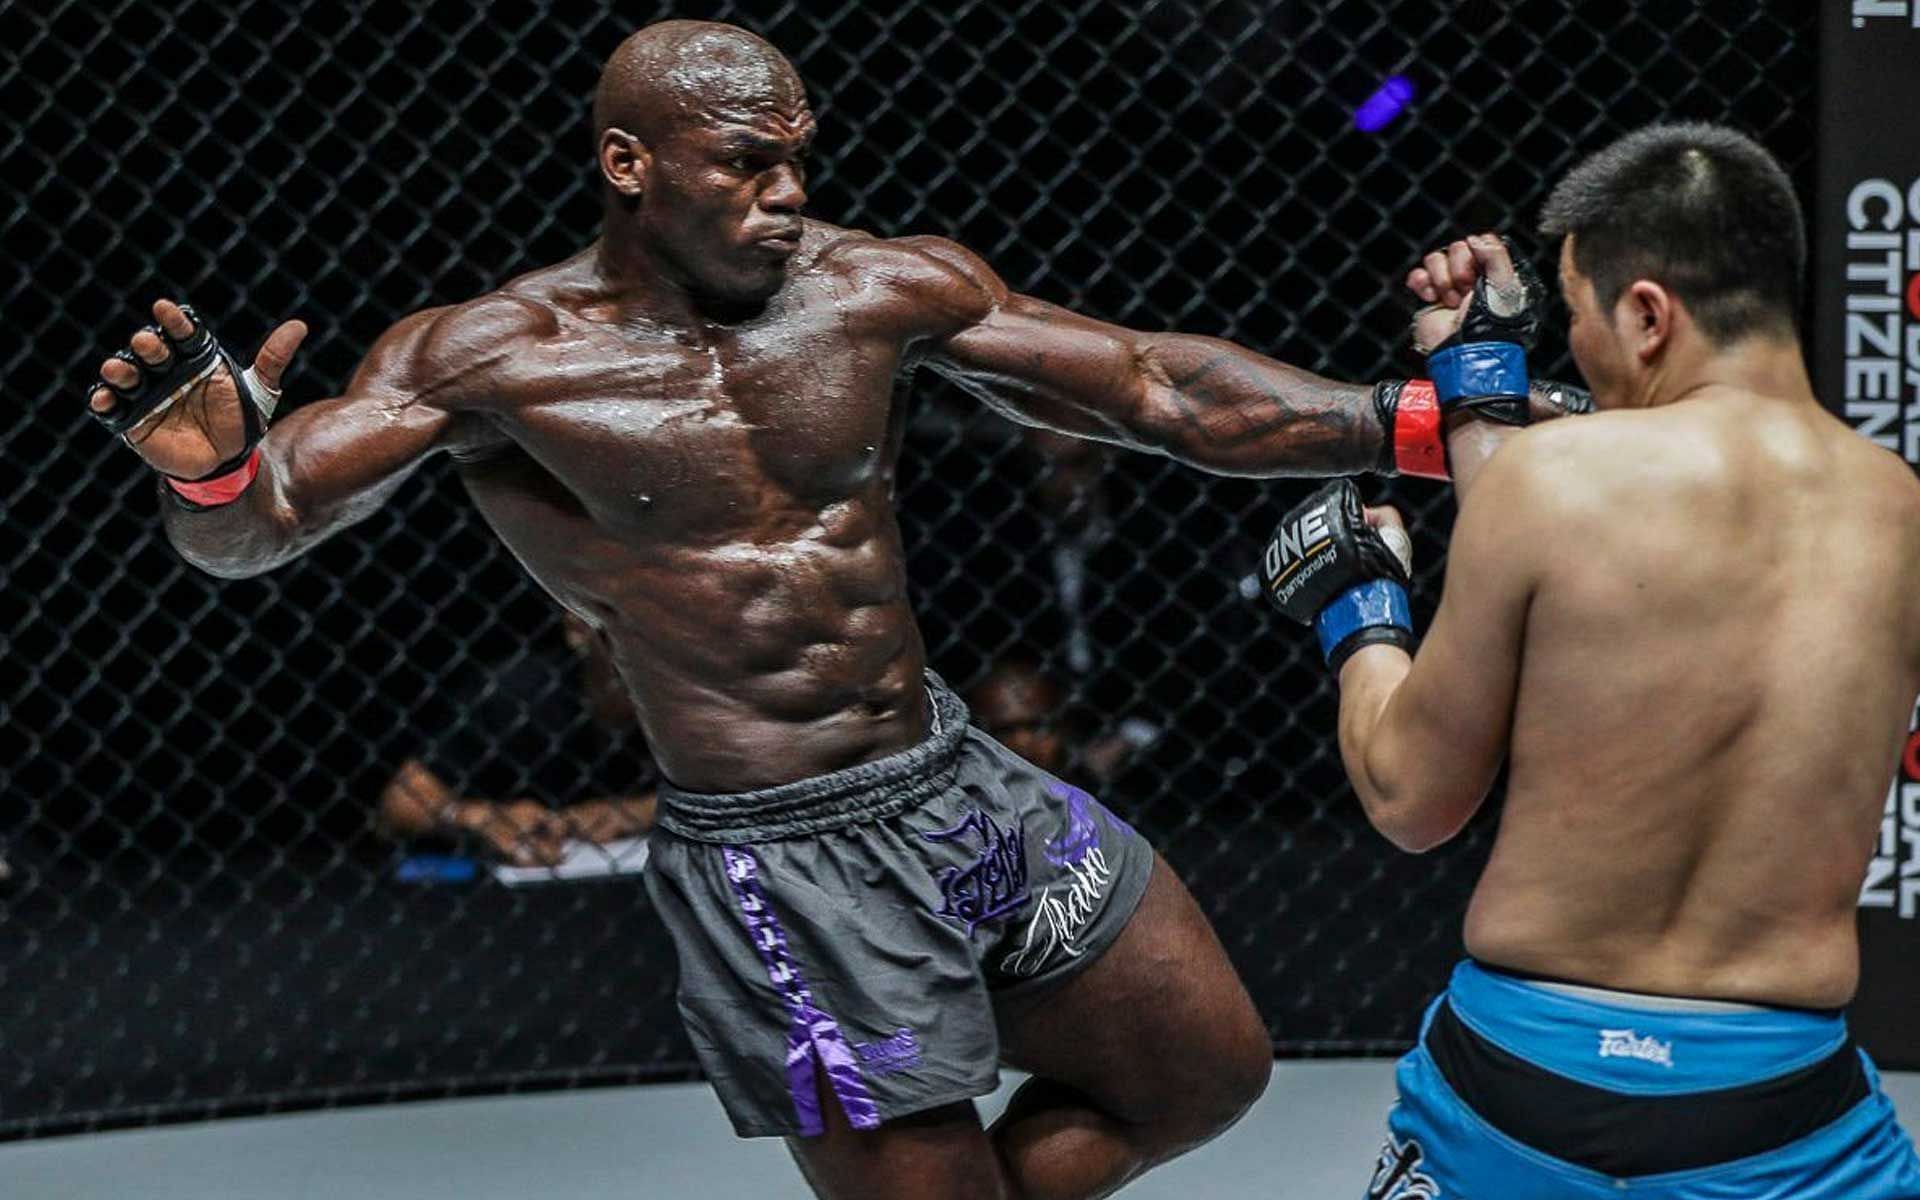 Alain Ngalani (left) delivers a kick to the body against an opponent [Photo courtesy of ONE Championship]